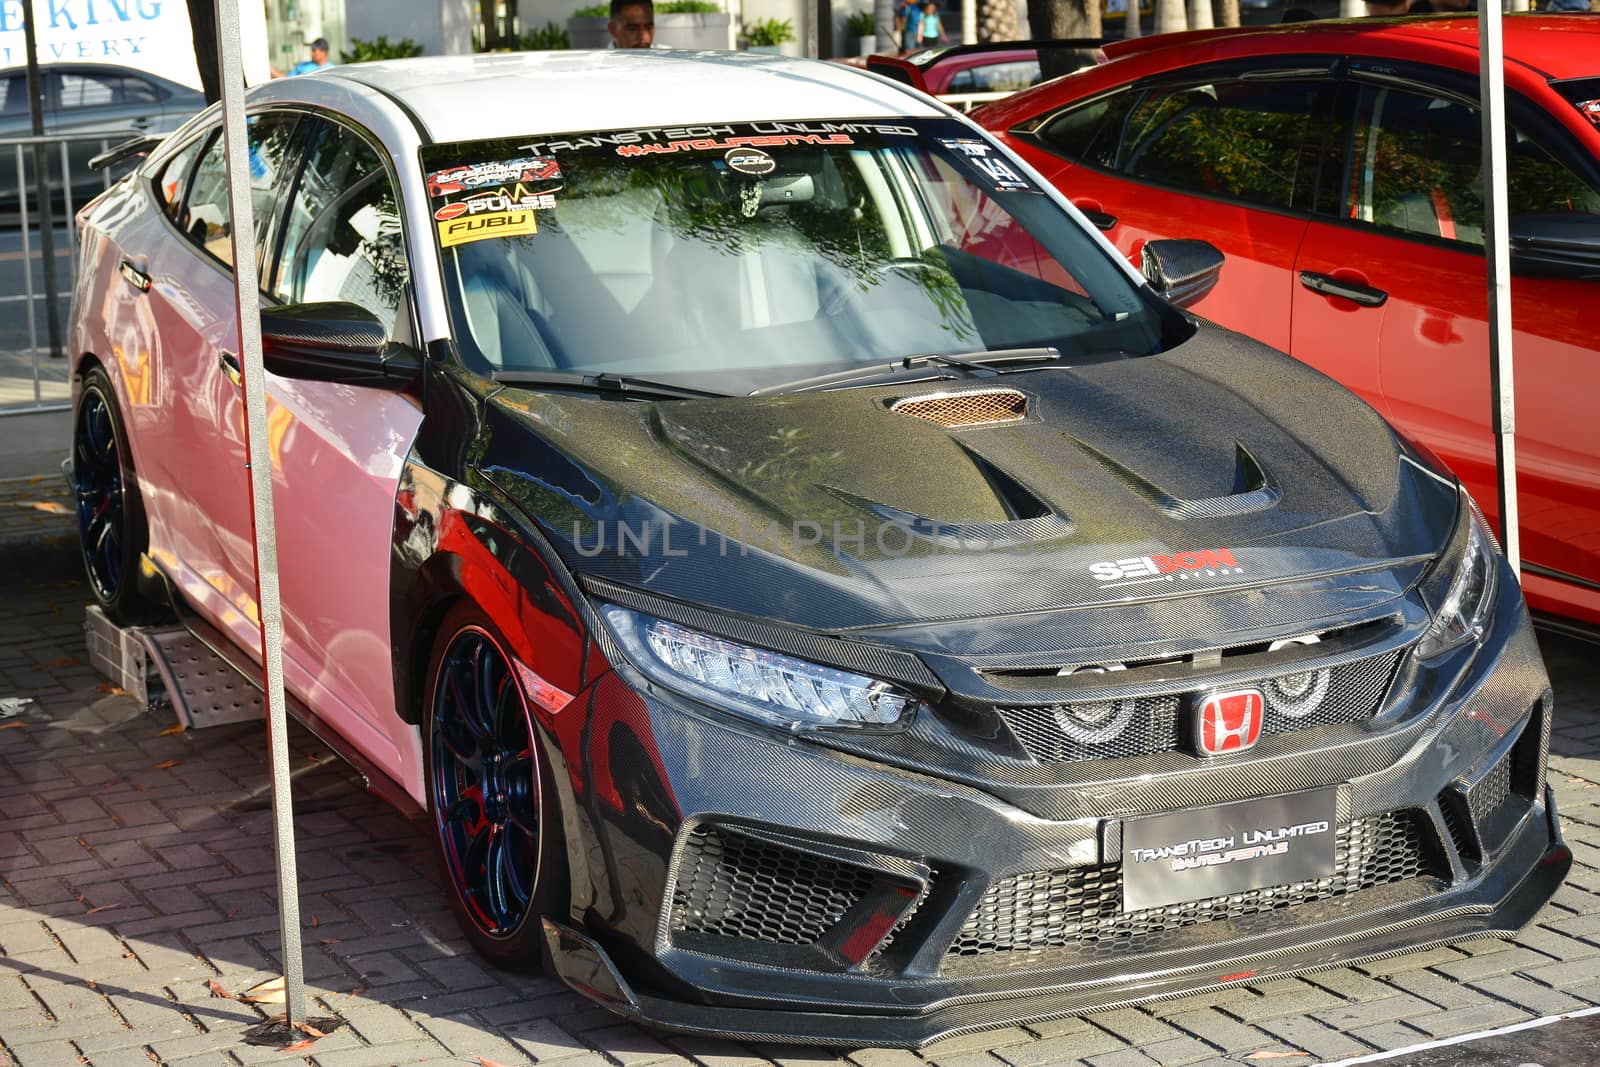 PASAY, PH - DEC 8 - Honda civic at Bumper to Bumper car show on December 8, 2018 in Pasay, Philippines.